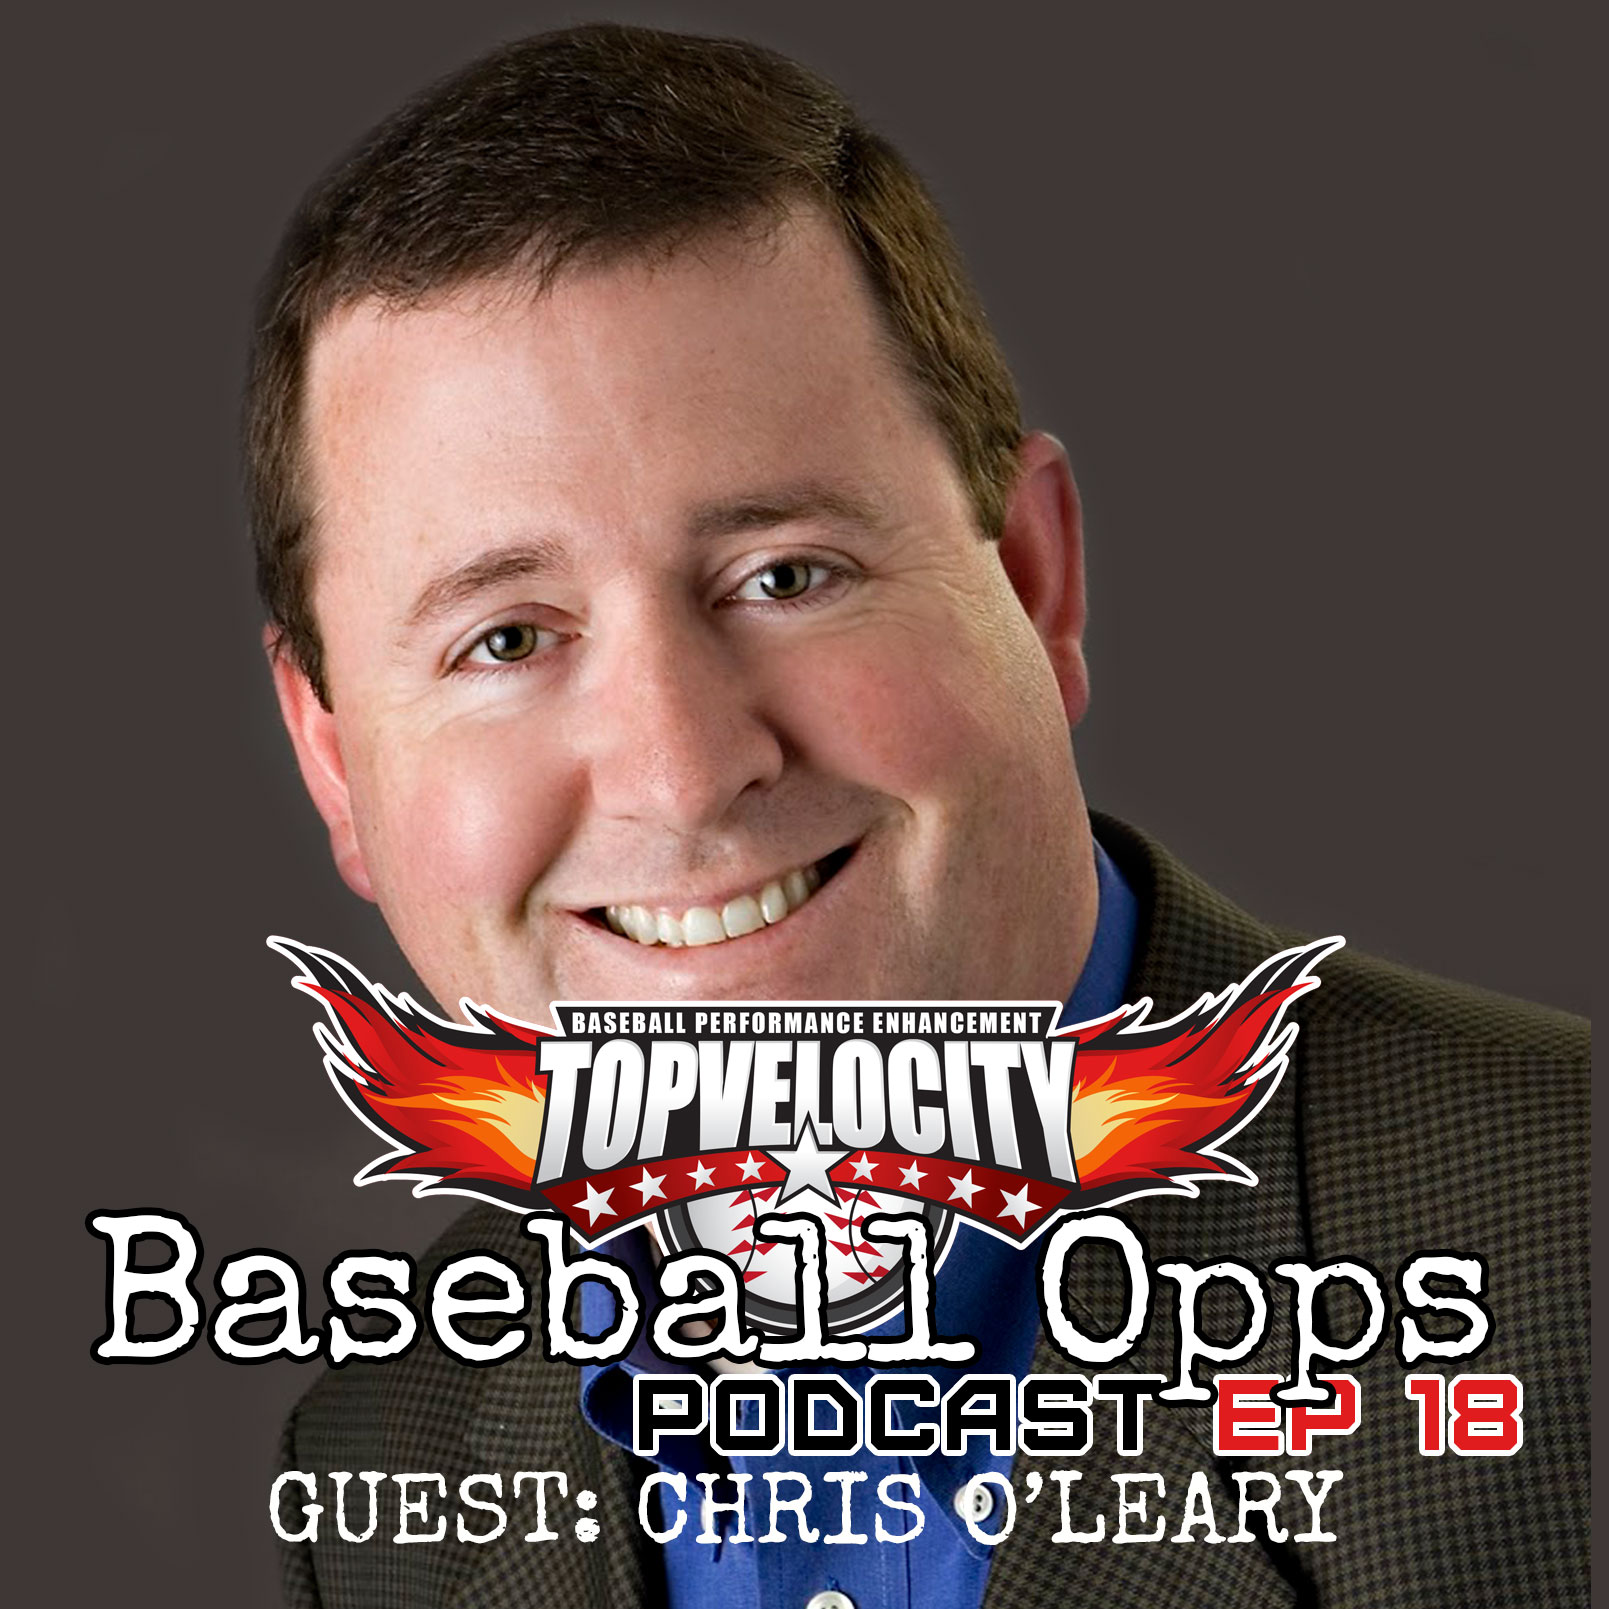 Coaches Rights to Analyze MLB Players with Chris O'Leary on Baseball Opps with TopV